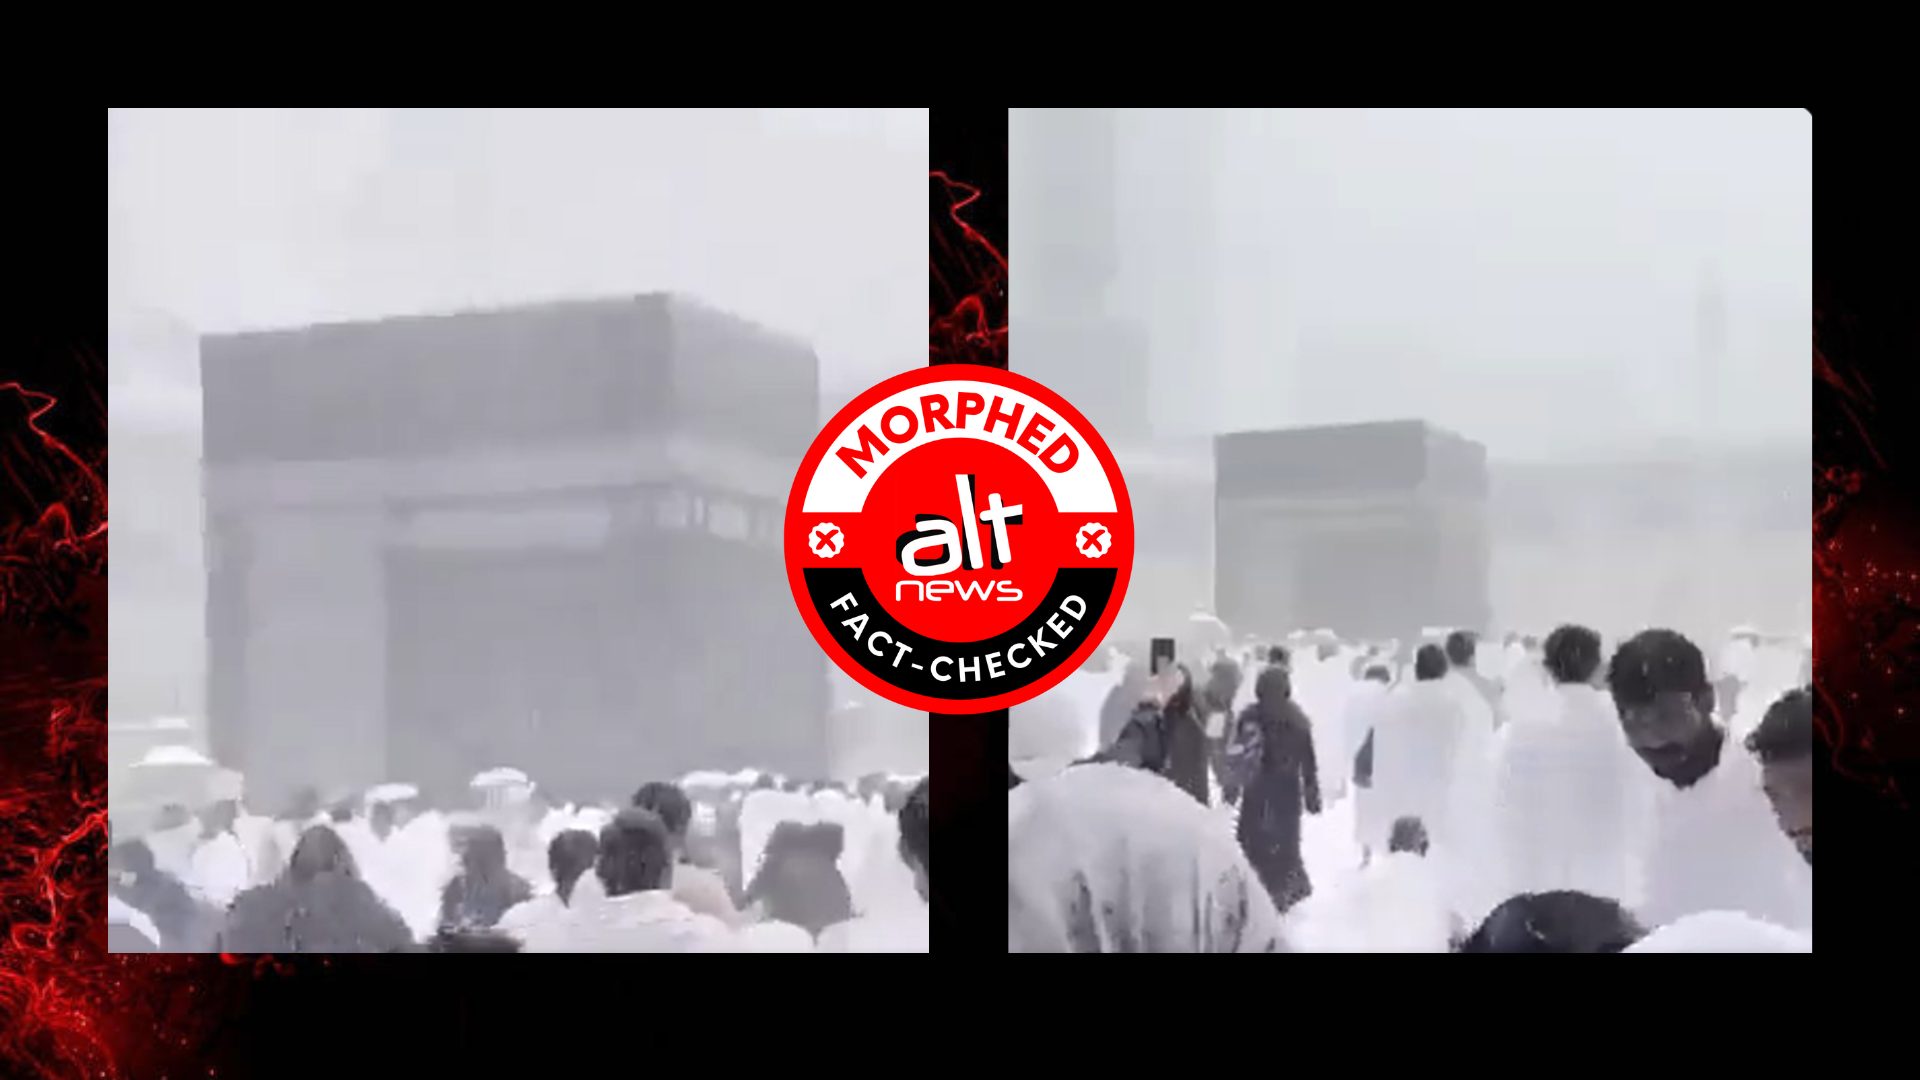 No snowfall in Mecca, viral video is digitally altered - Alt News